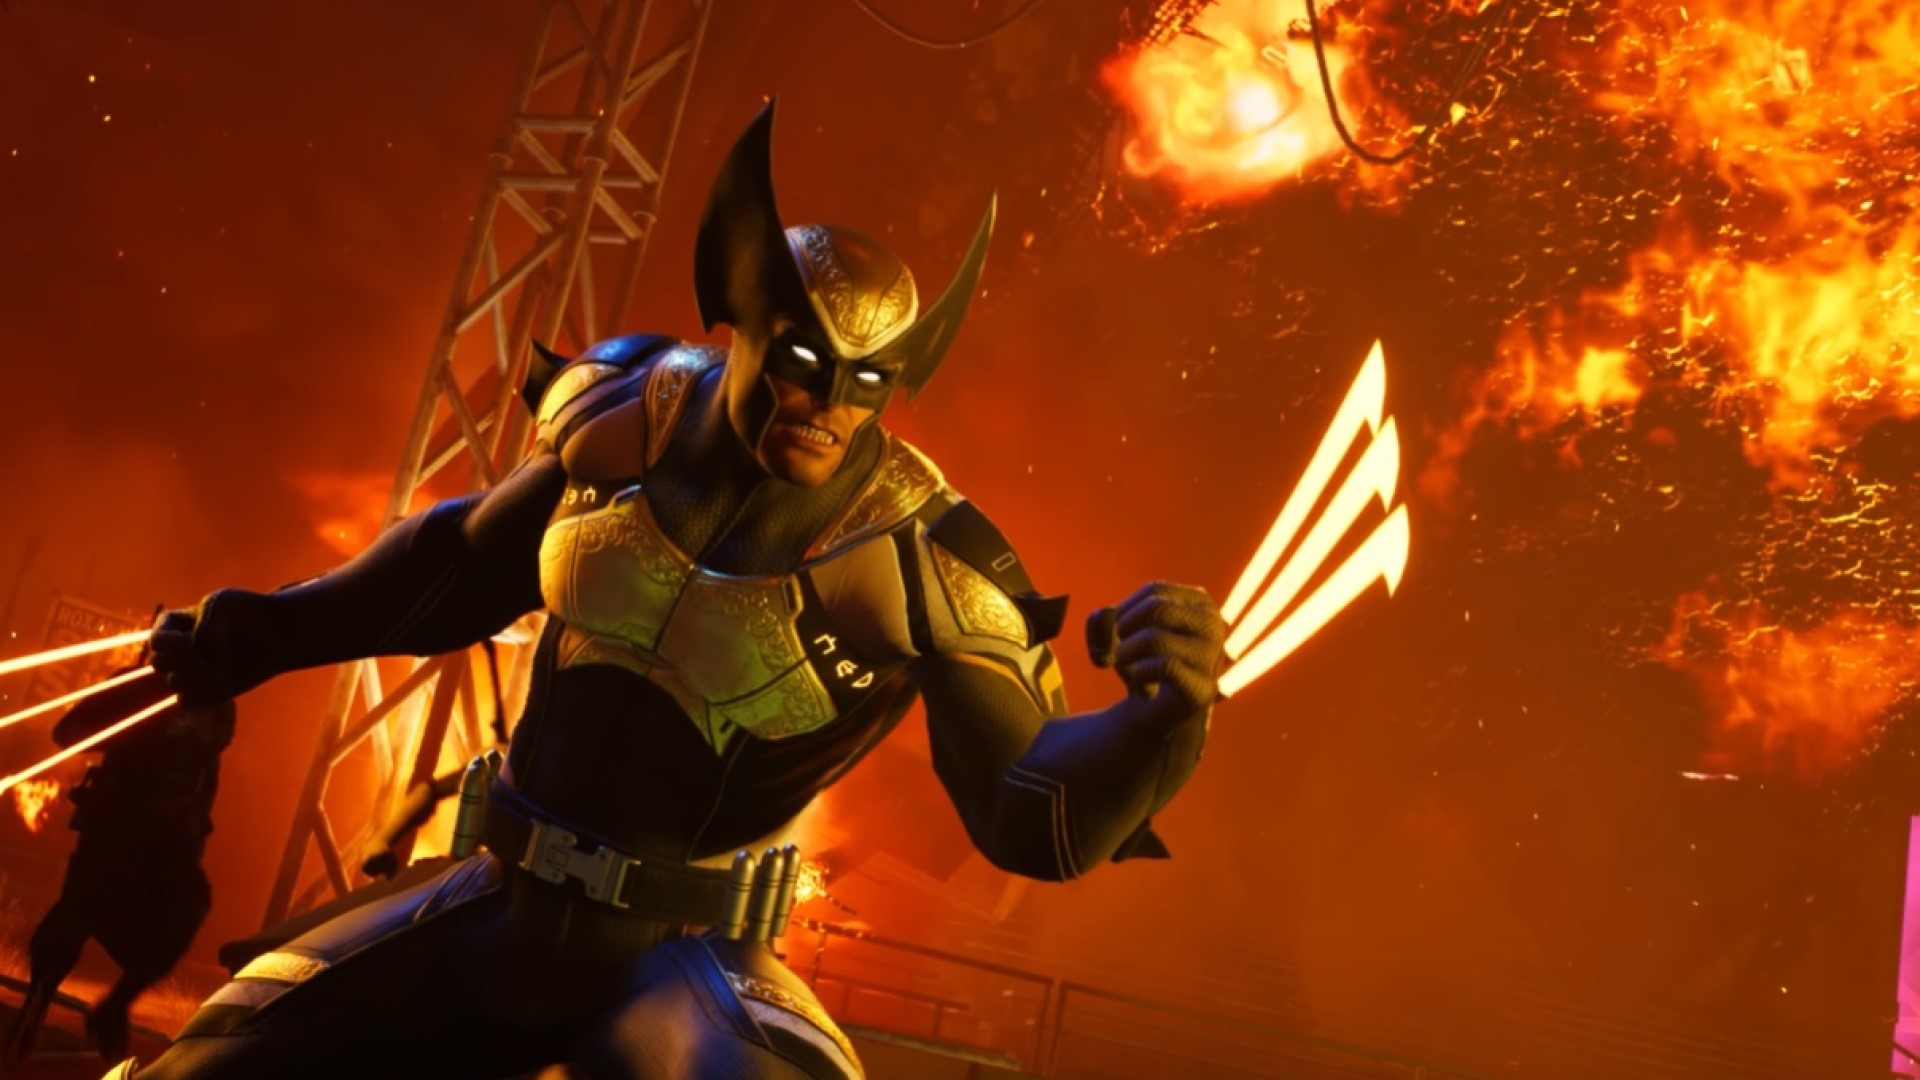 Wolverine gameplay revealed in Marvel's Midnight Suns